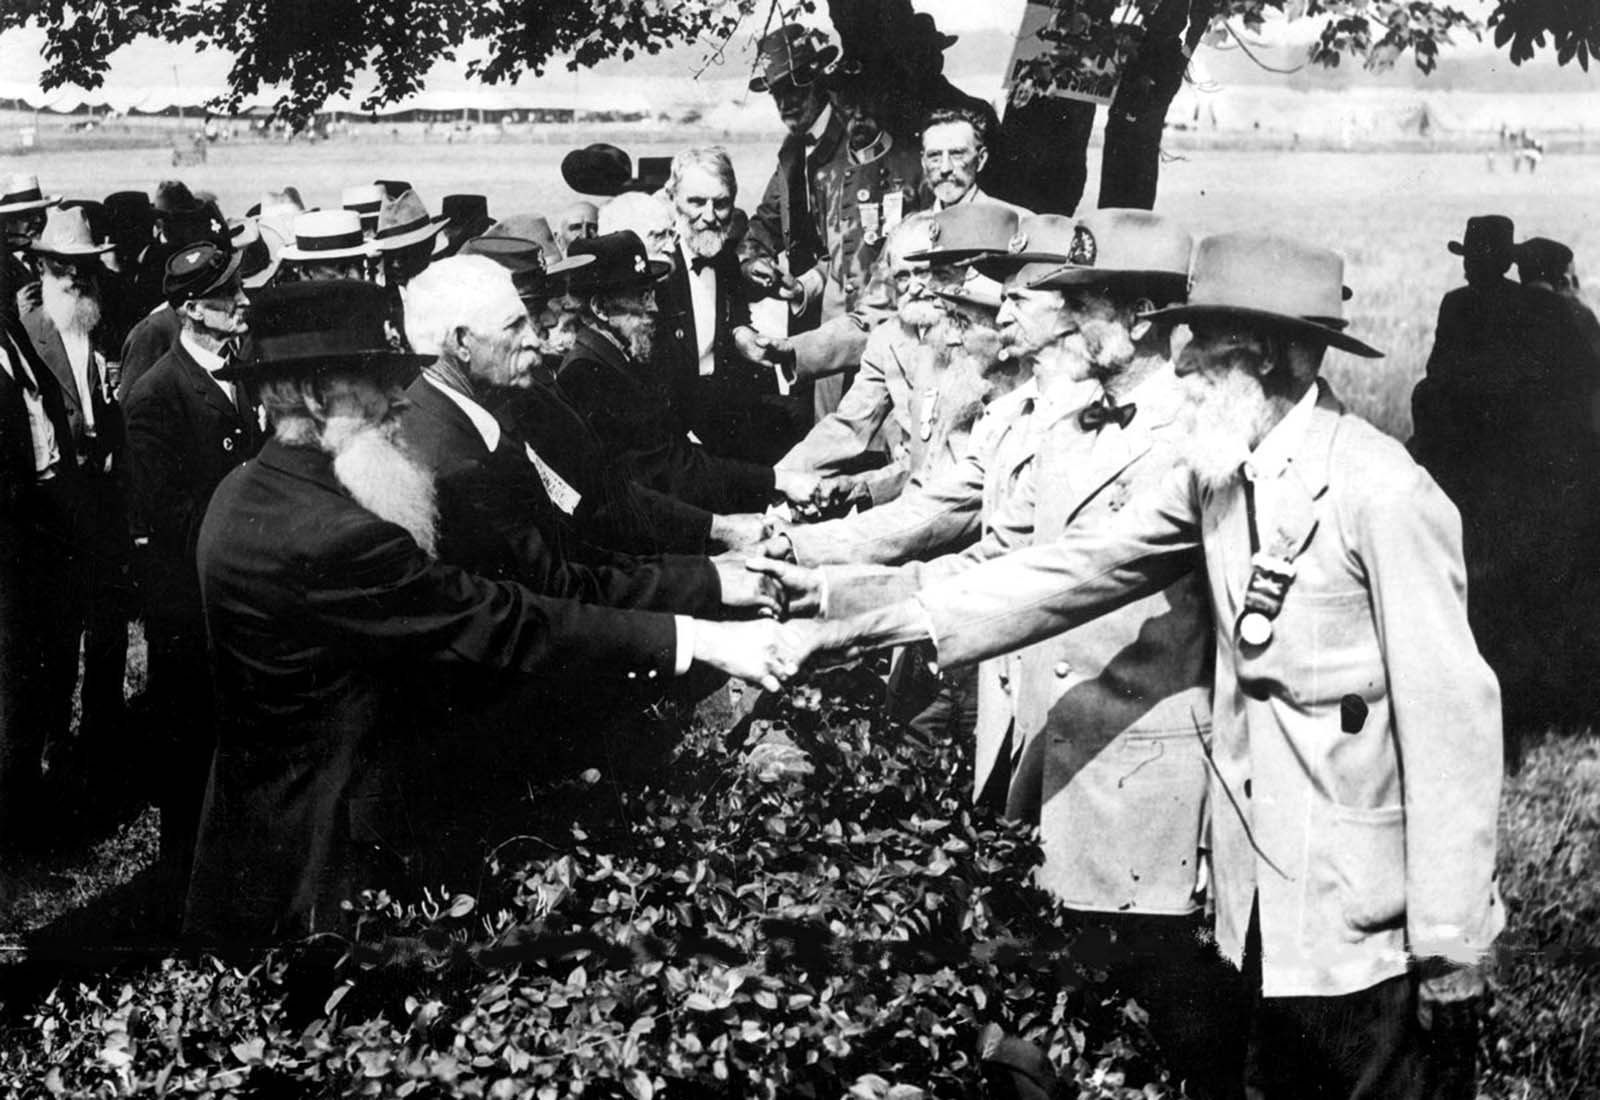 At the 50th anniversary of the battle of Gettysburg, Union (left) and Confederate (right) veterans shake hands at a reunion, in Gettysburg, Pennsylvania. 1913.